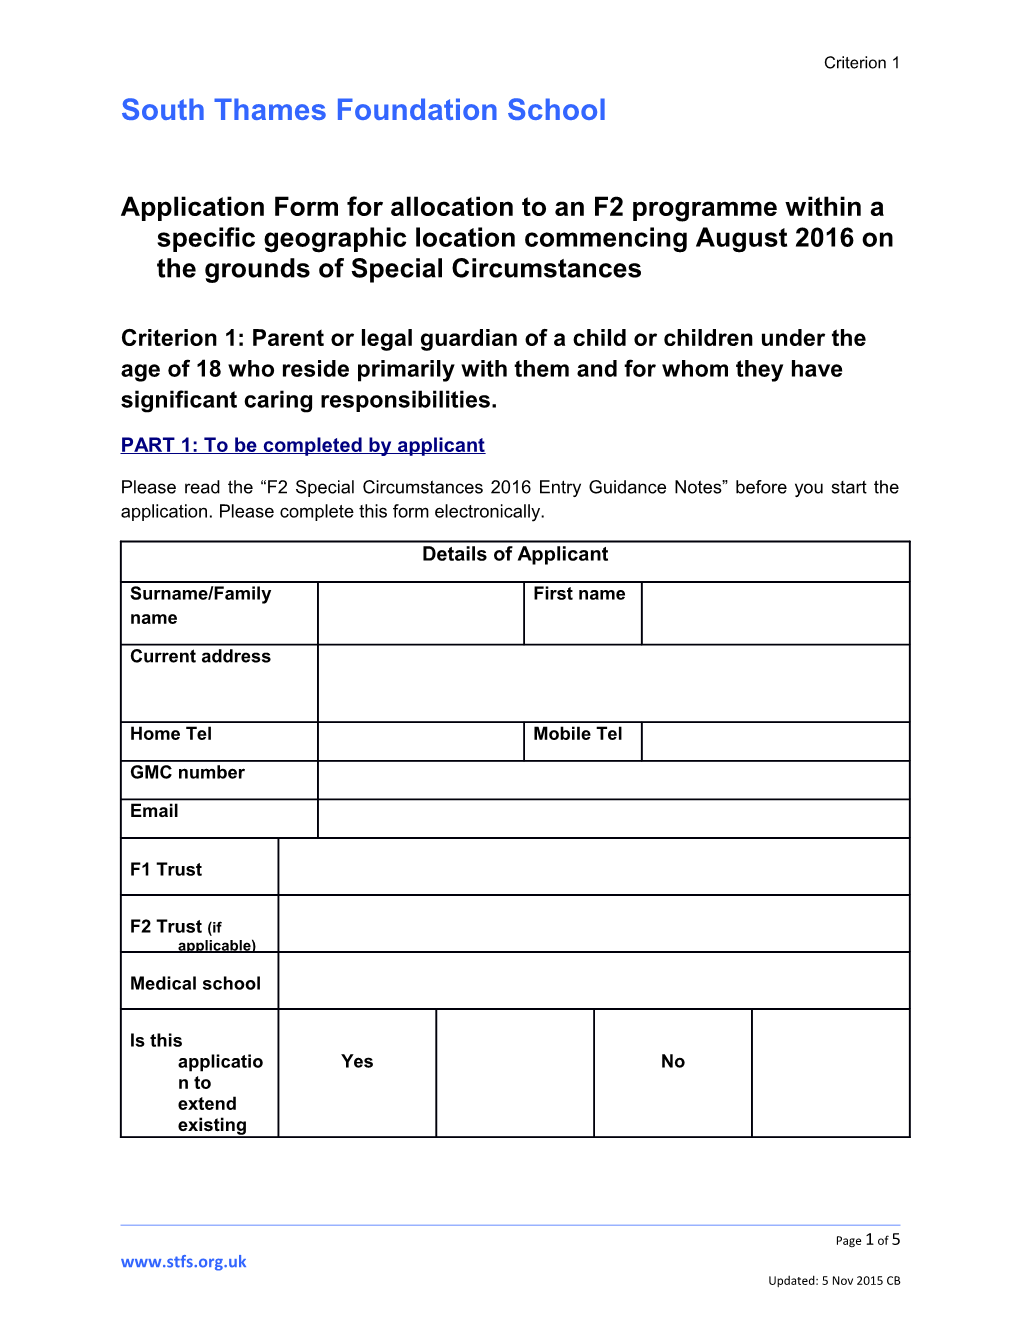 Application Form for Pre-Allocation to a Foundation School